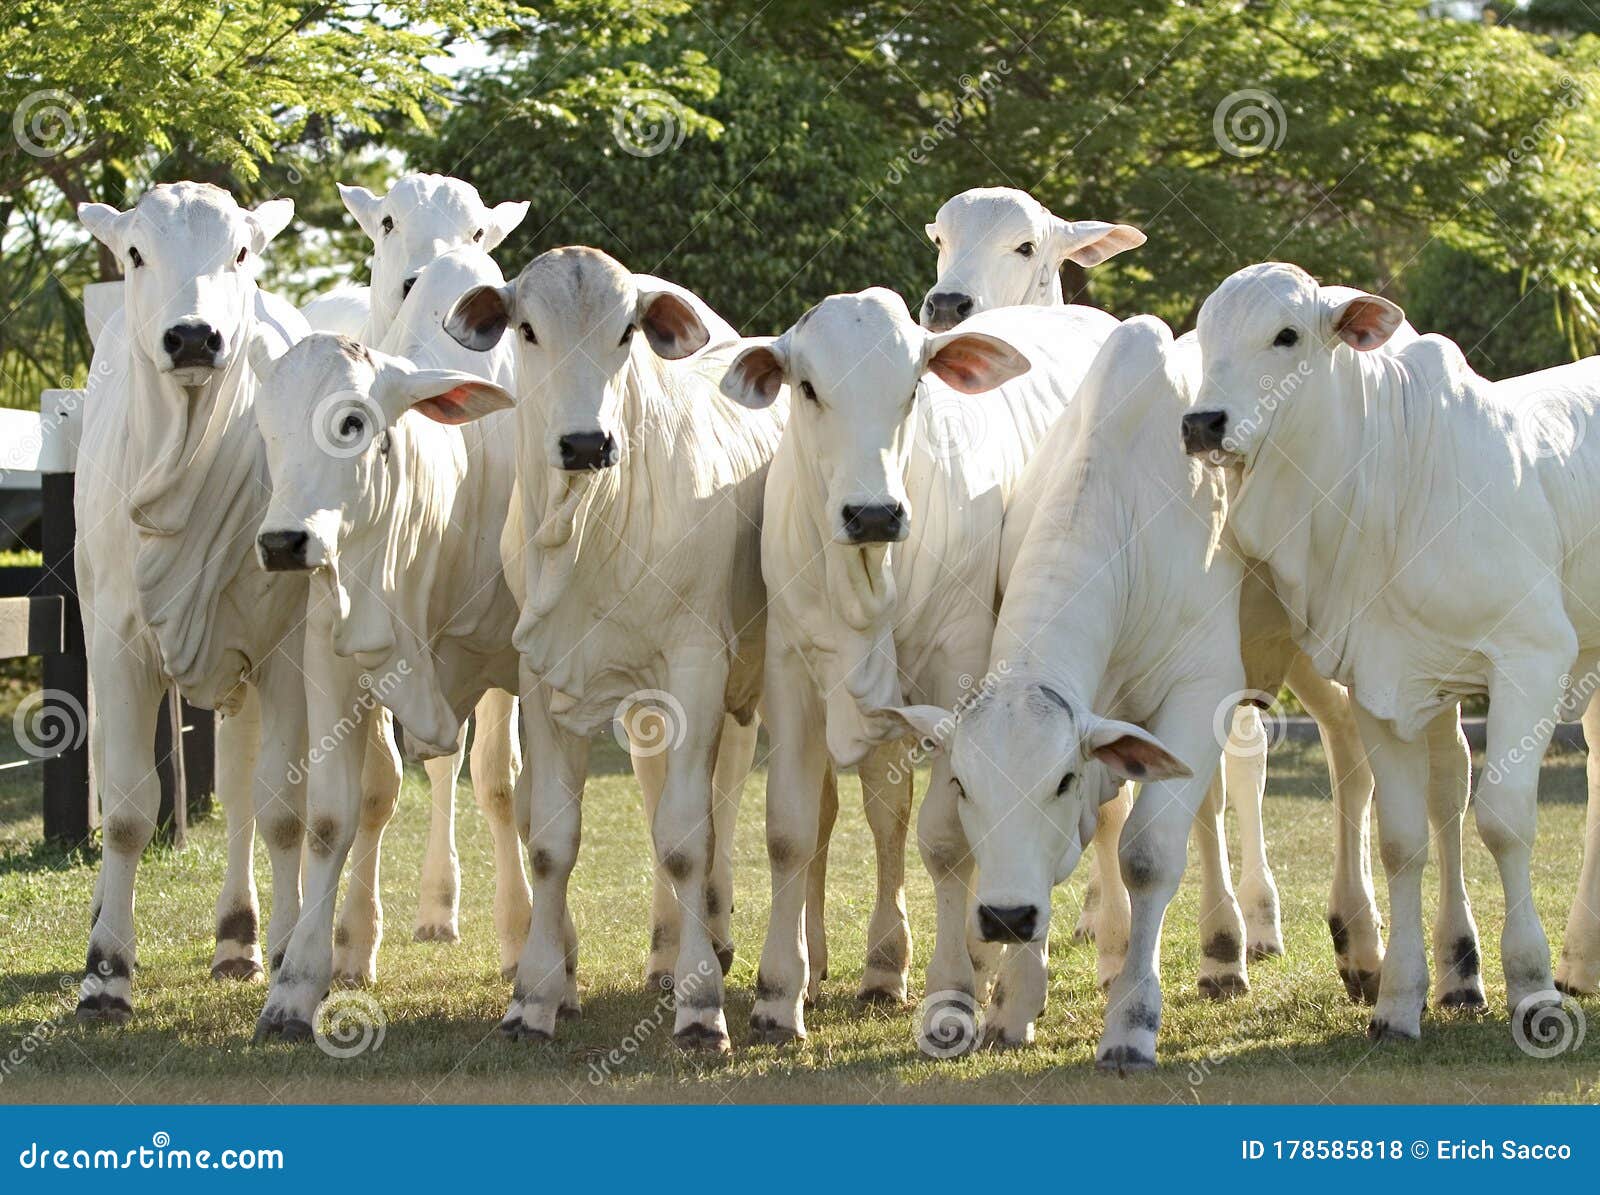 high quality nellore steers from brazilian farms